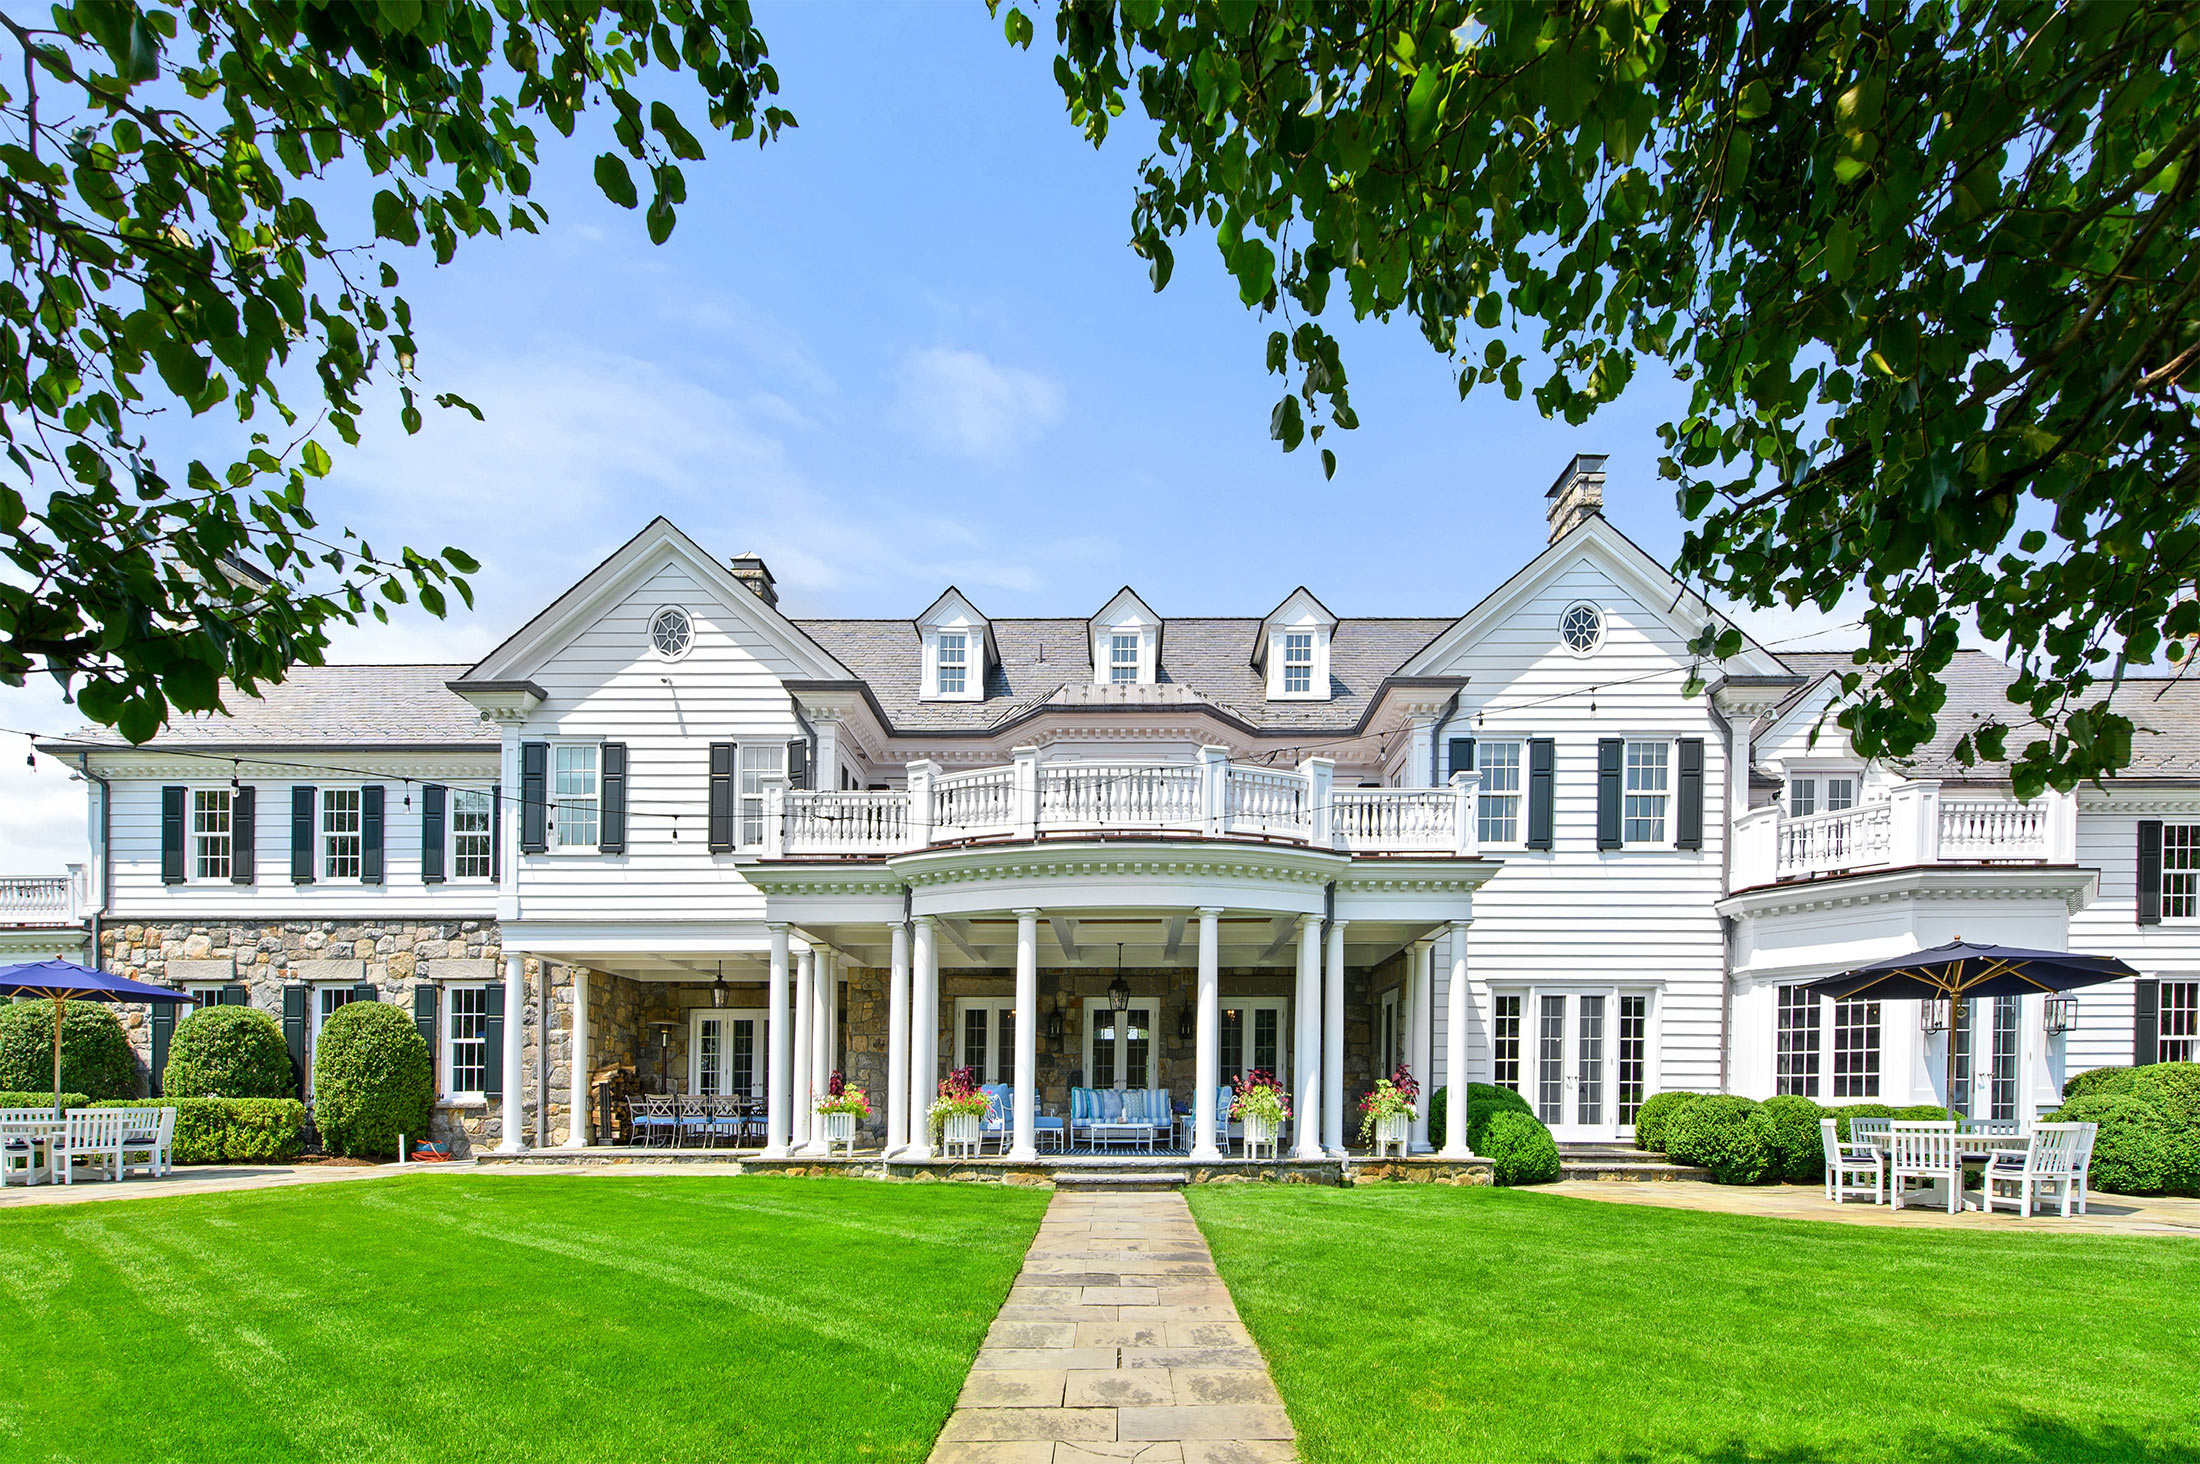 435 Round Hill Road&nbsp;sold for $17.6 million earlier this month.